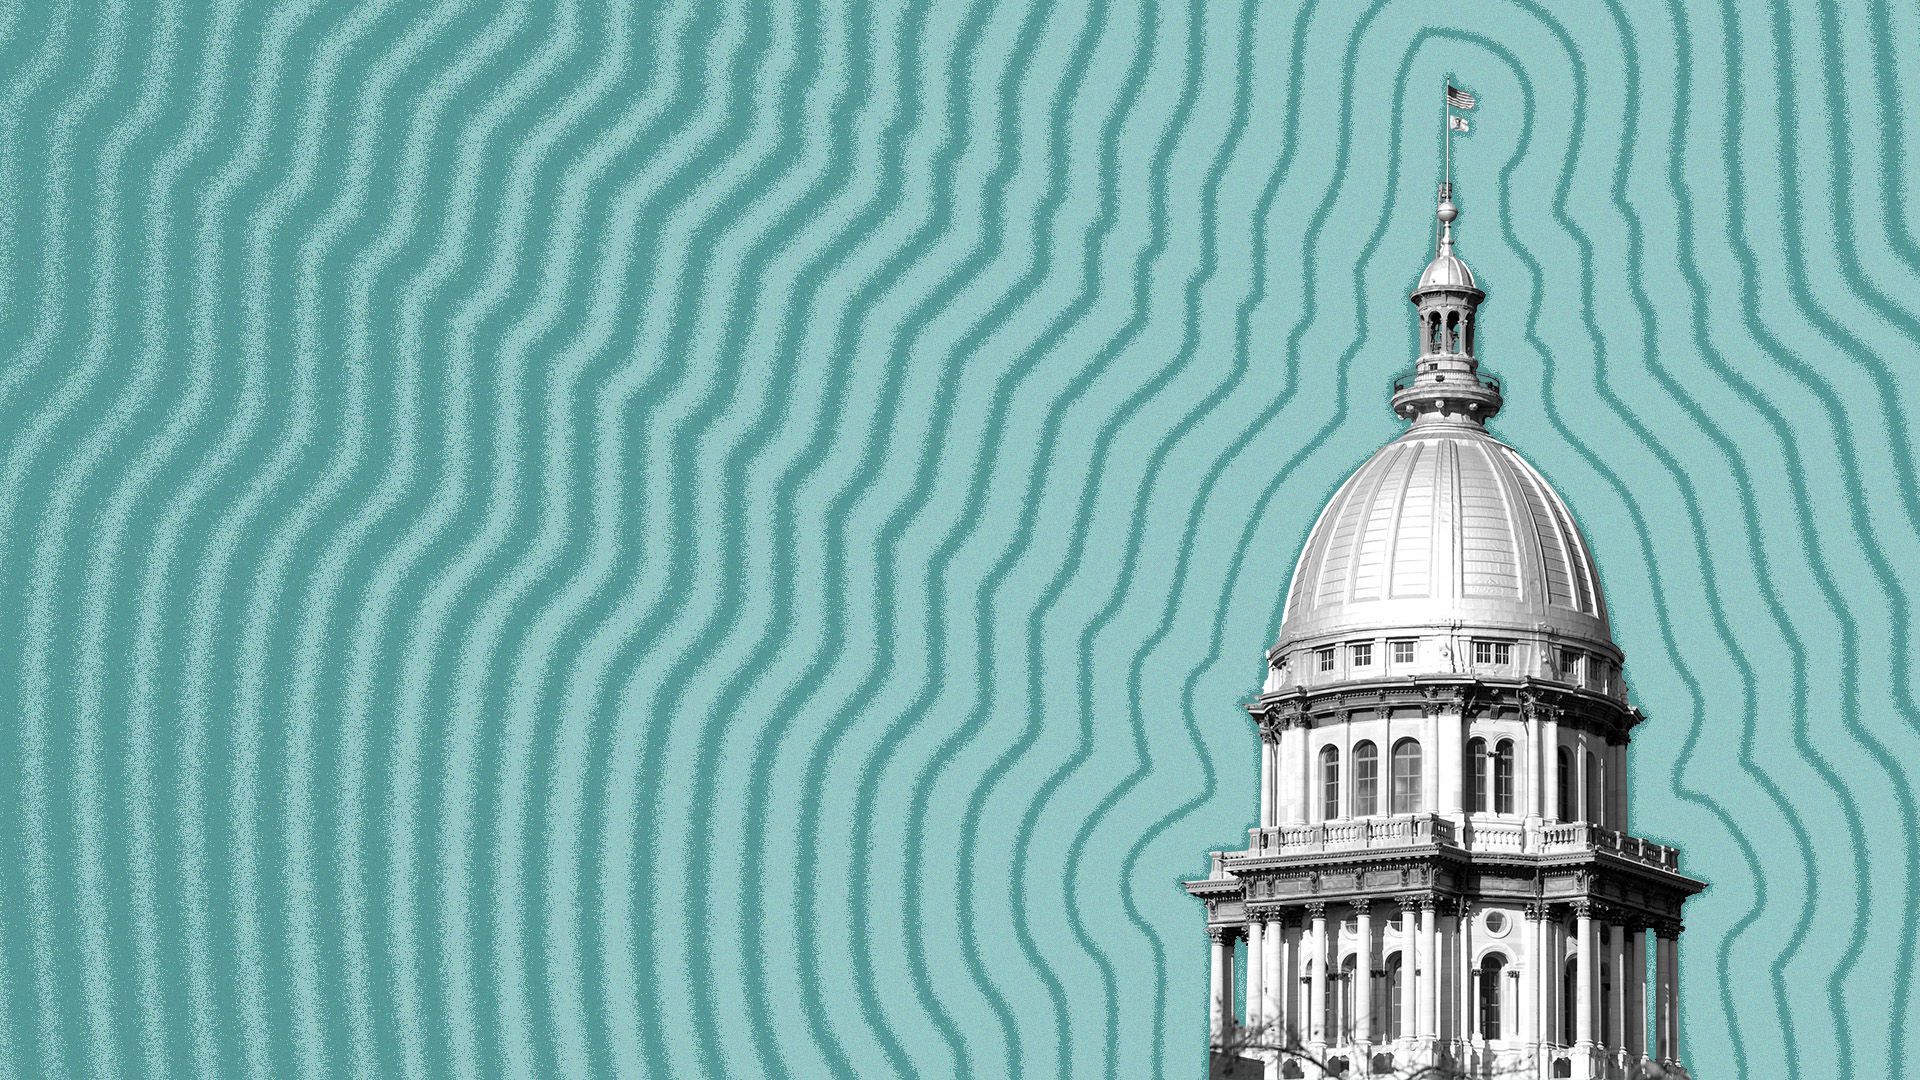 Illustration of the Illinois State Capitol building with lines radiating from it.